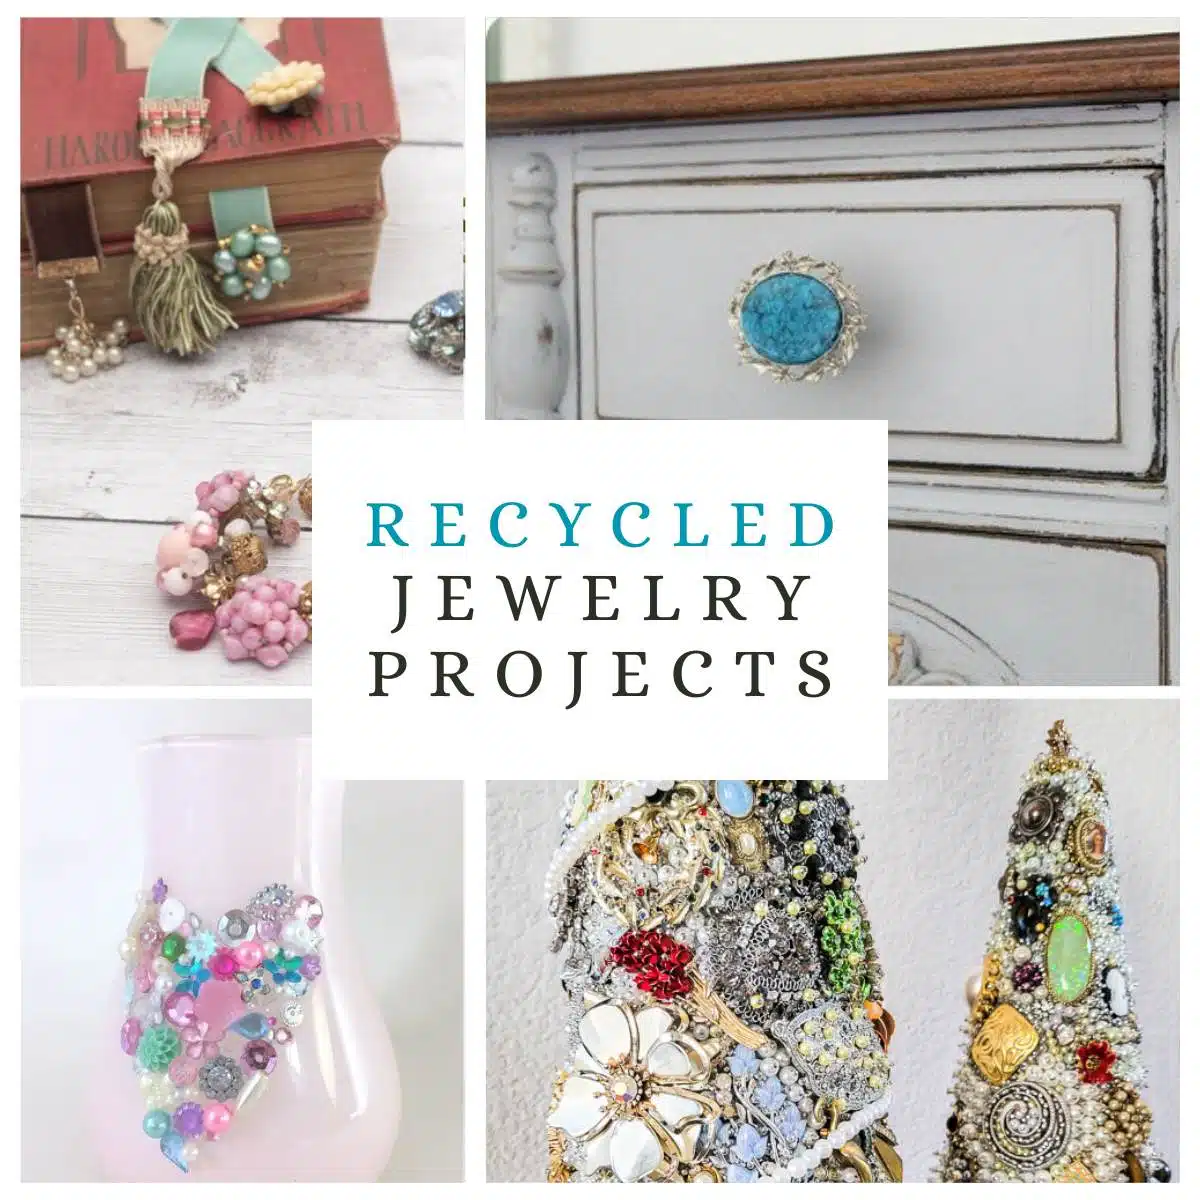 13 Recycled Jewelry Projects